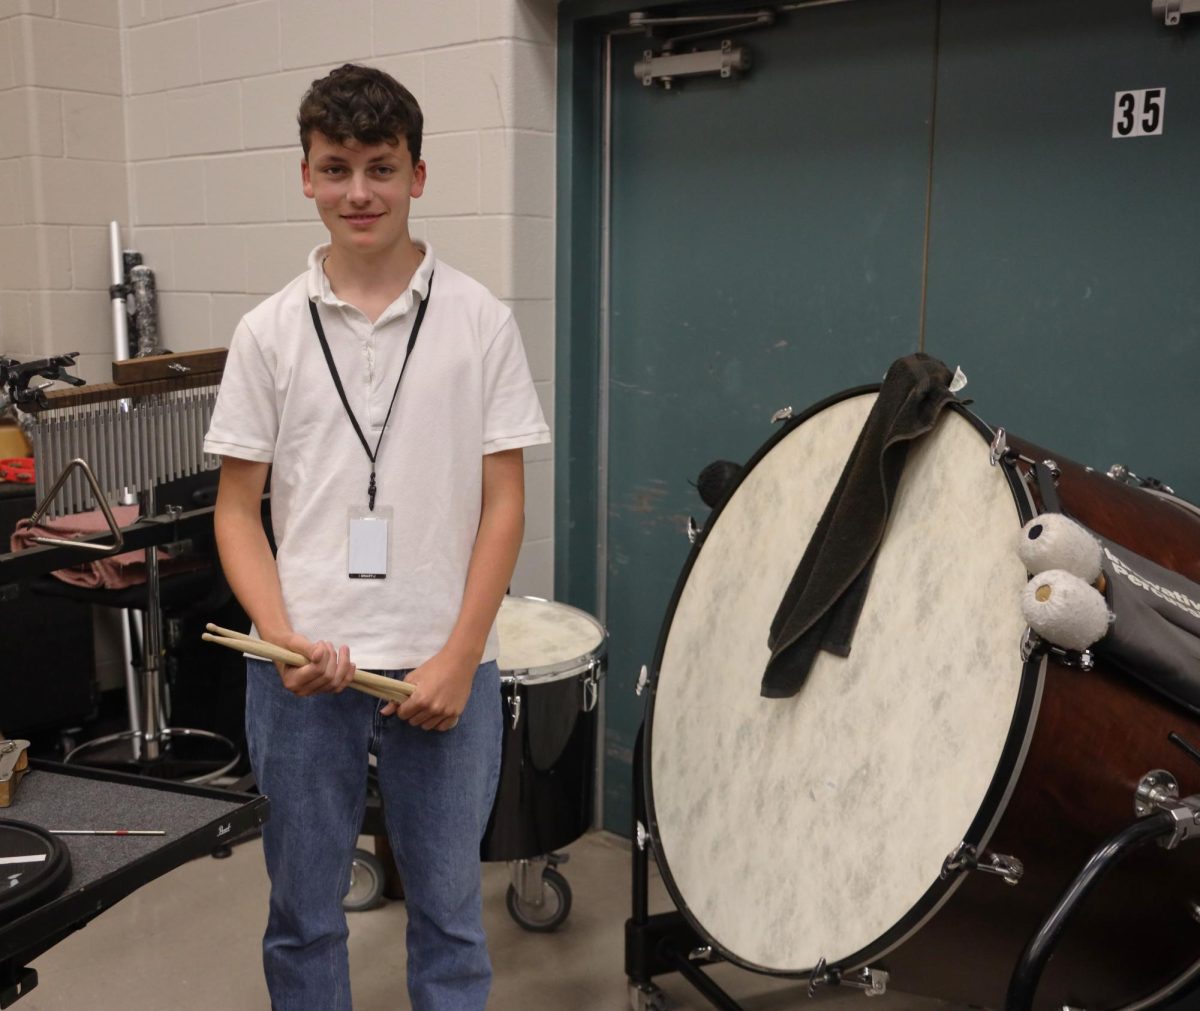 Justus Grewers next to the pairs of equipment that he uses during the marching season